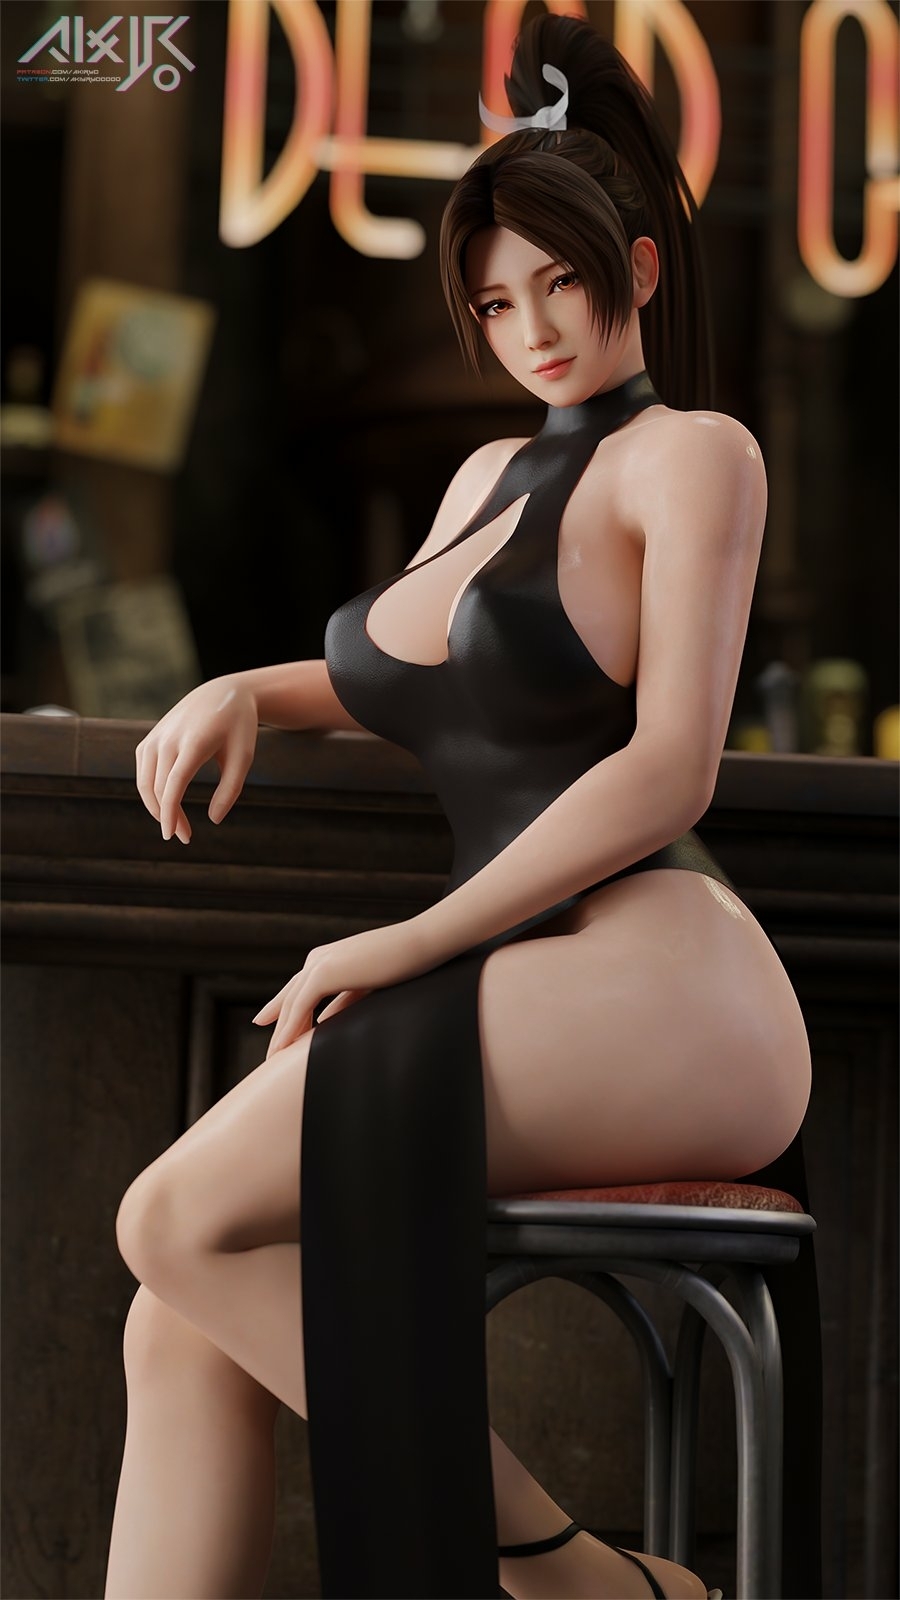 Shall we have a drink?🍷 Dead Or Alive Mai Shiranui 3d Porn 3d Girl Nsfw Sexy Big Tits Big Breasts Perfect Body Dress Outfit Elegant